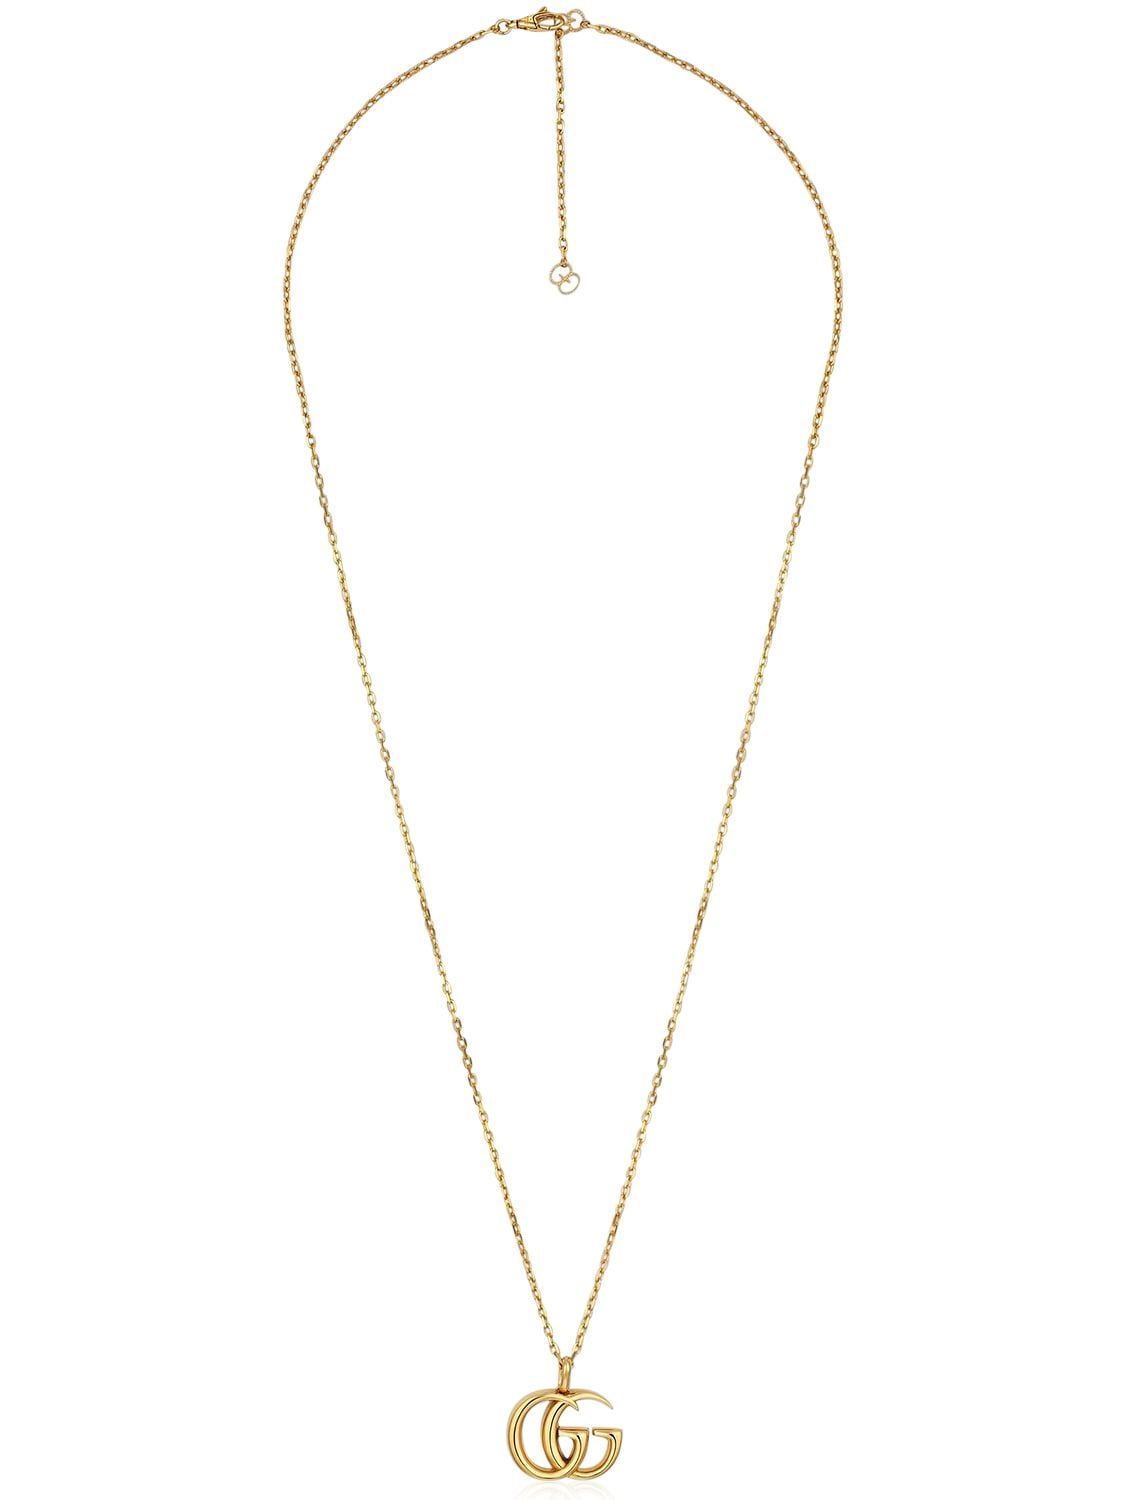 GUCCI 18KT YELLOW GOLD GG NECKLACE,67IWGE002-R09MRA2